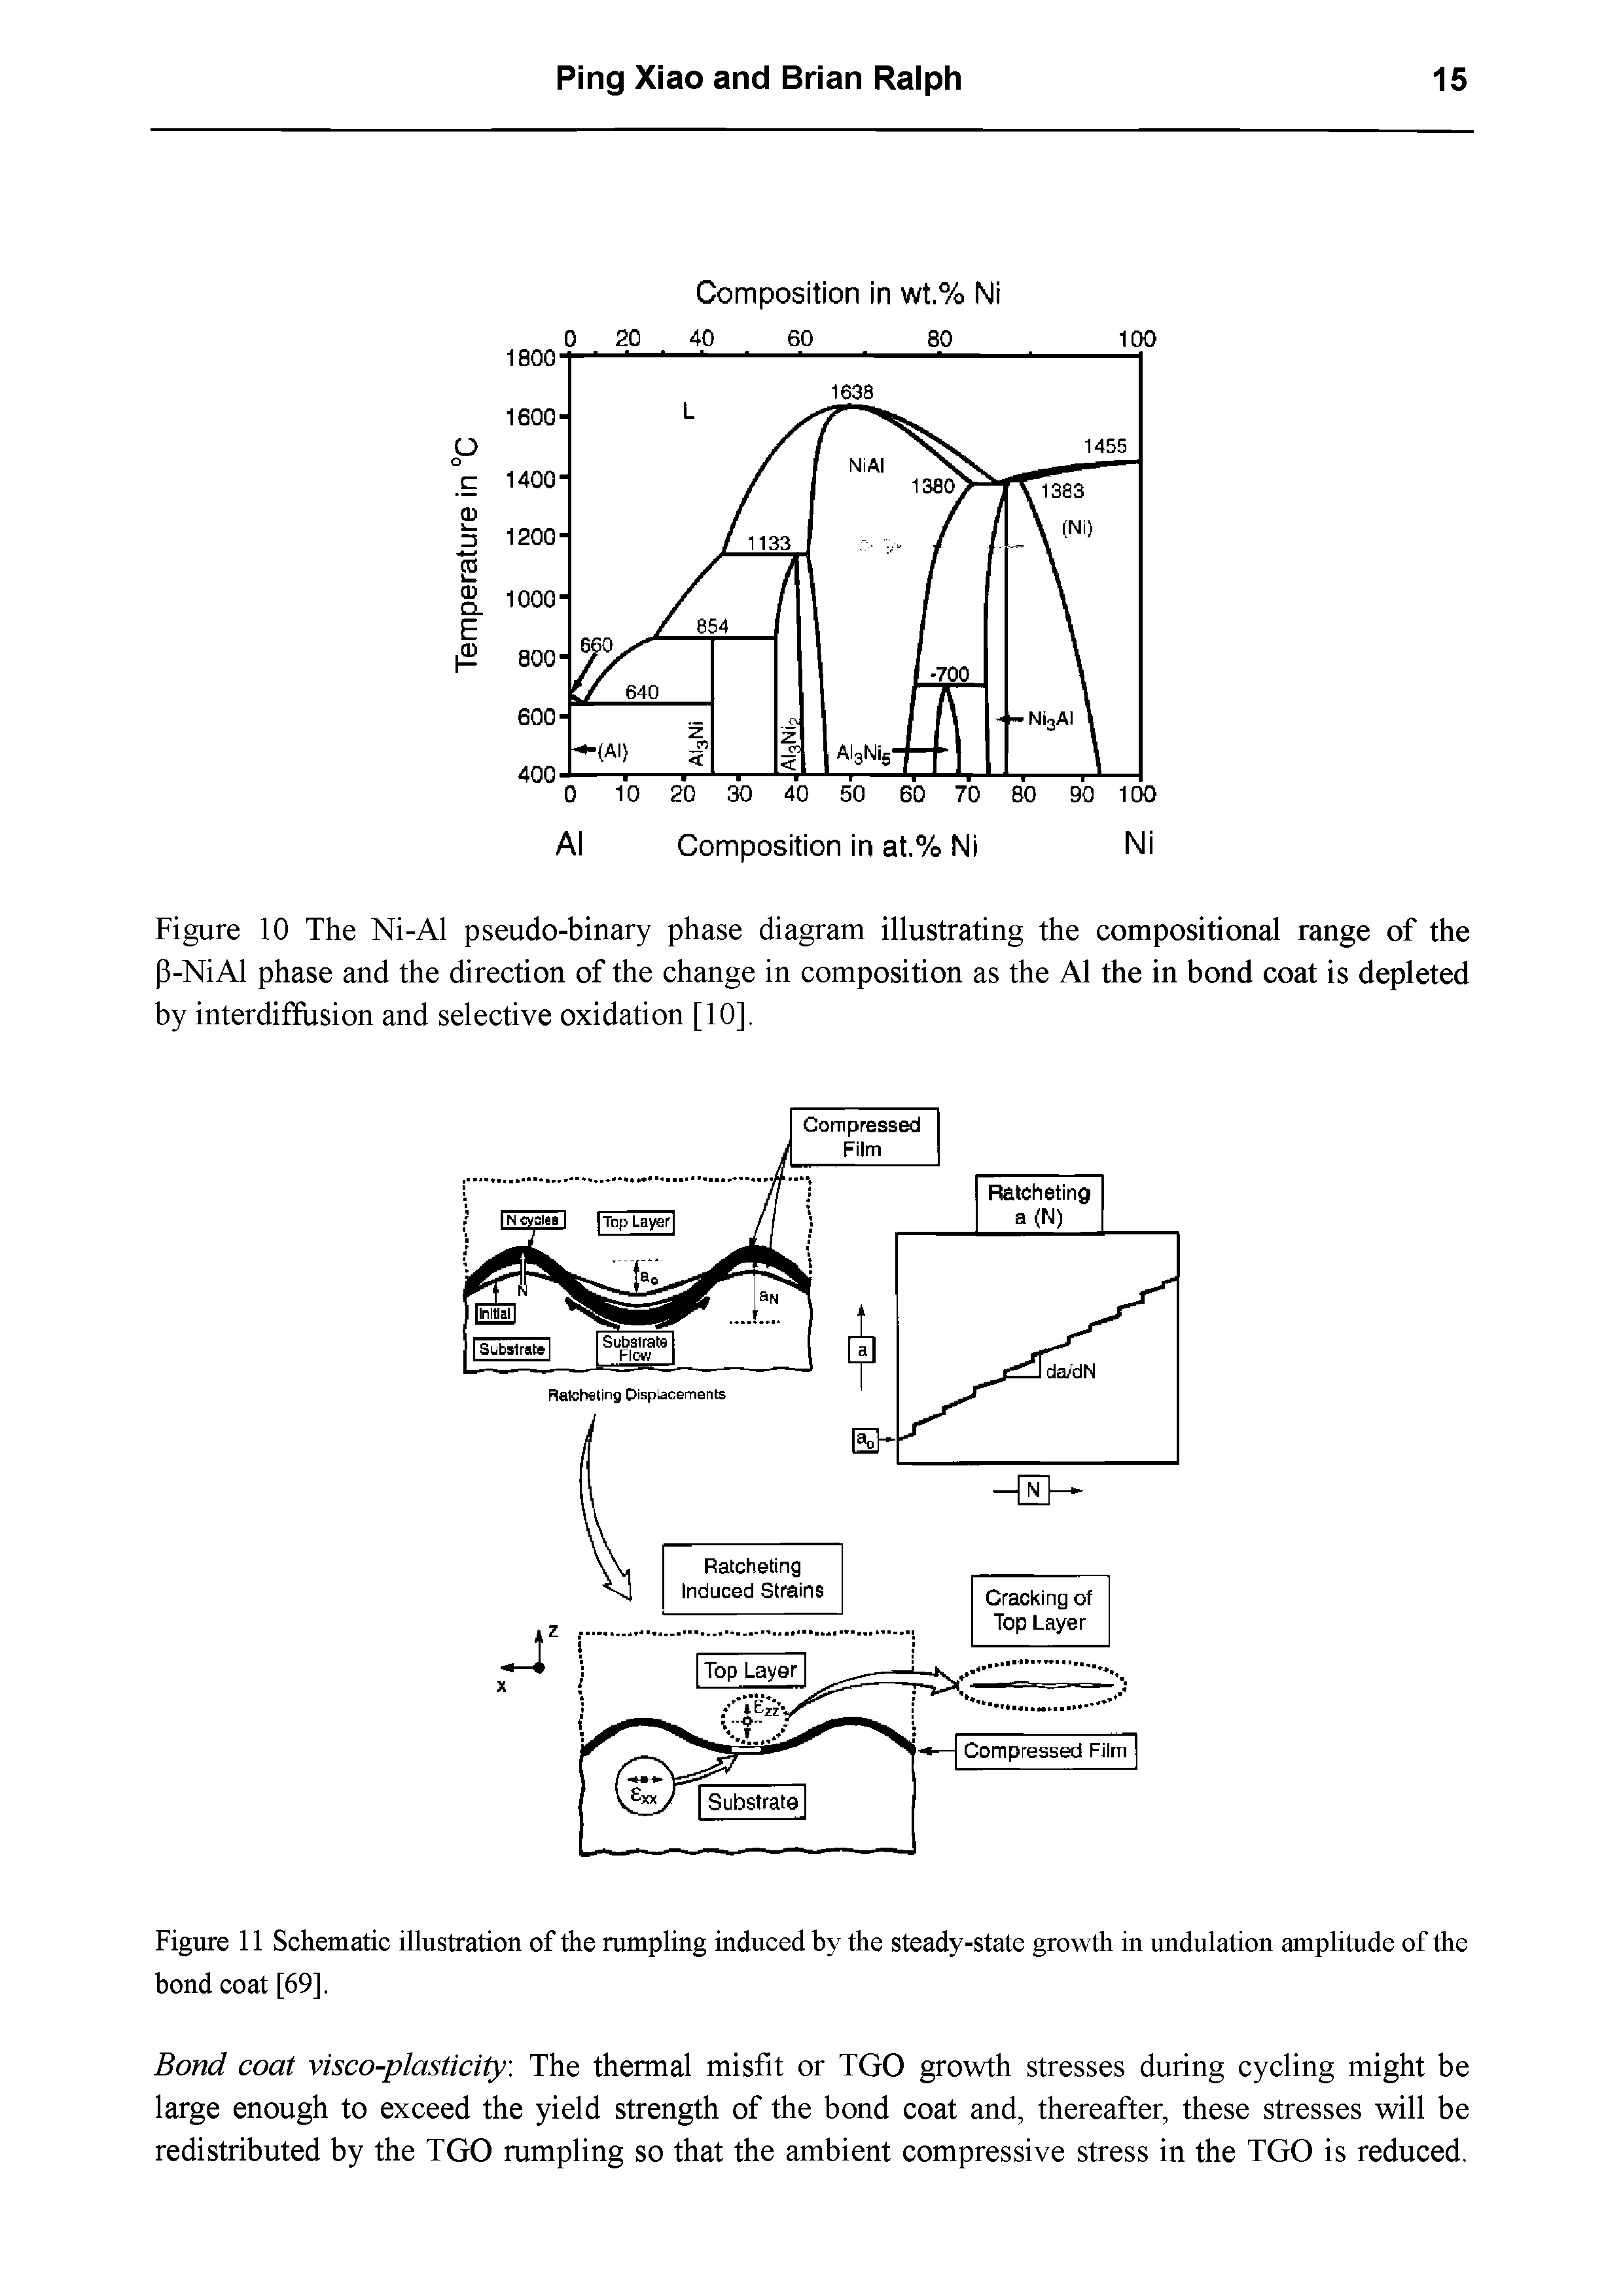 Figure 10 The Ni-Al pseudo-binary phase diagram illustrating the compositional range of the P-NiAl phase and the direction of the change in composition as the A1 the in bond coat is depleted by interdiffusion and selective oxidation [10],...